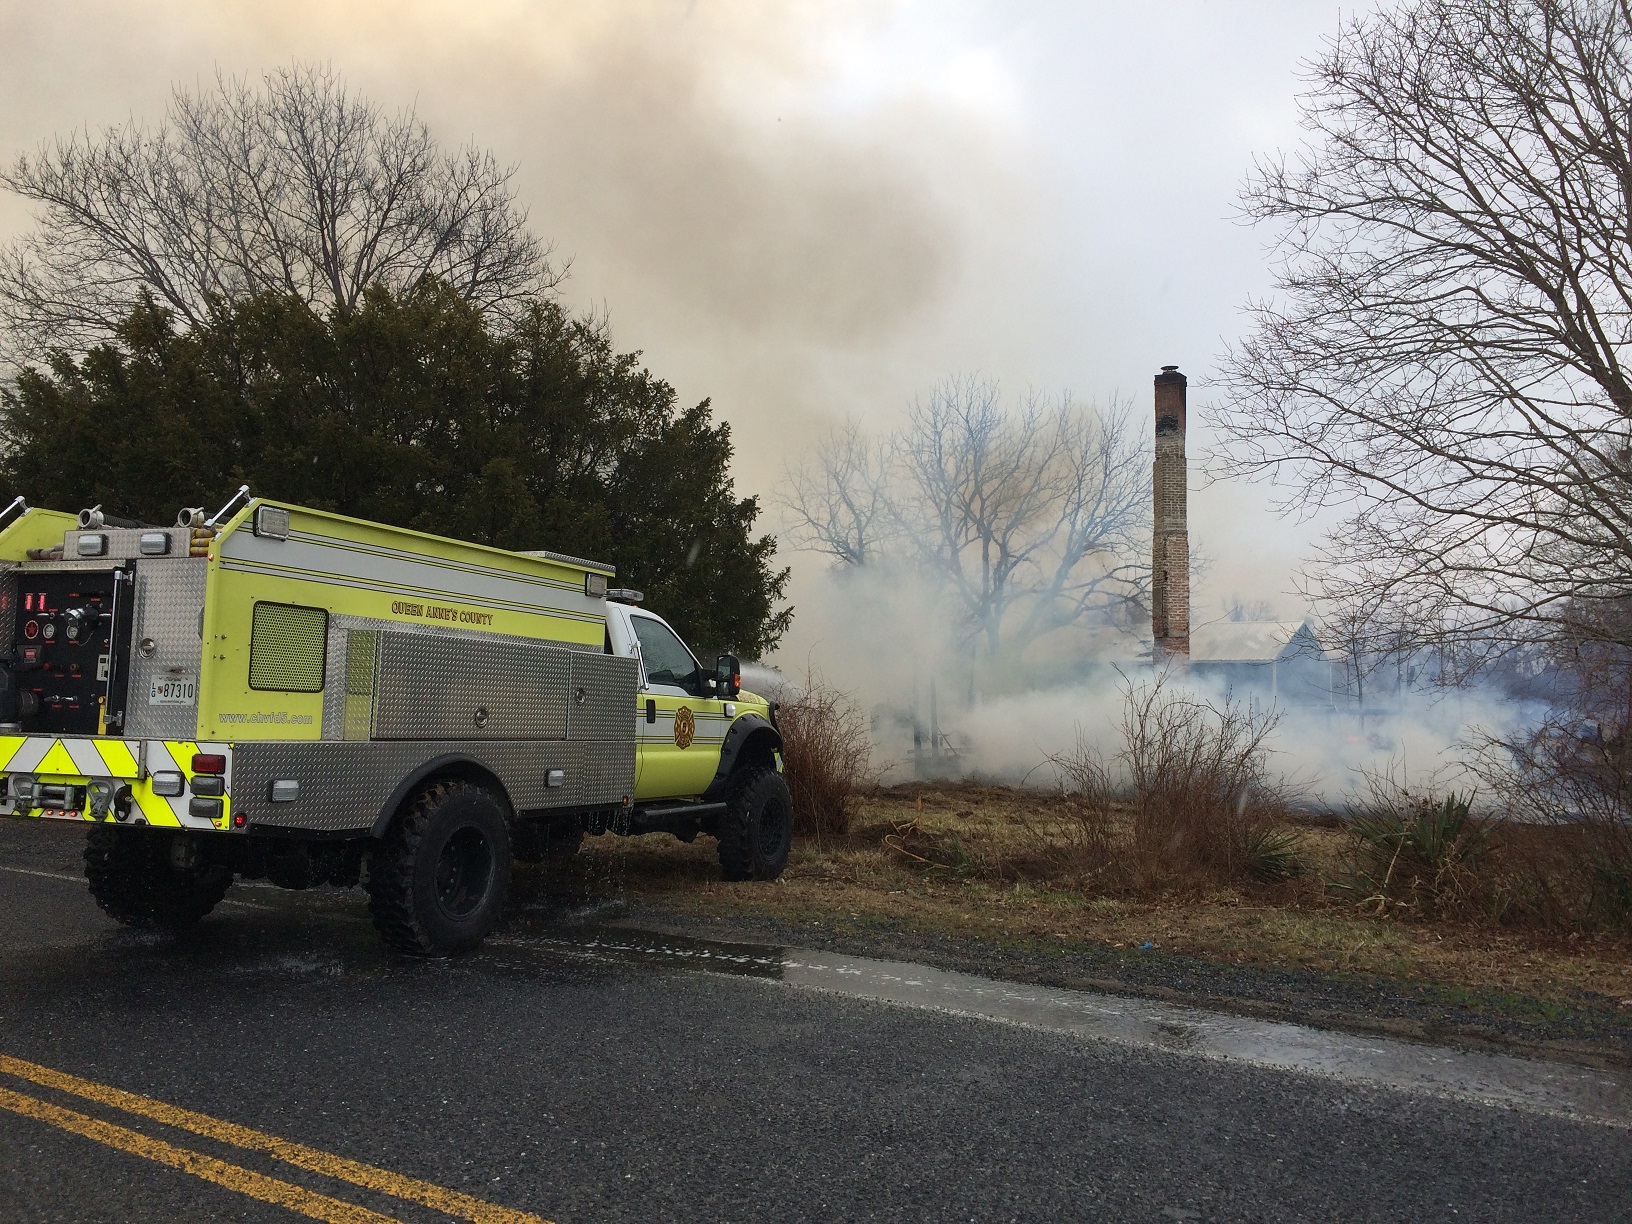 Brush 5 - 2011 Ford F-550 / General Fire